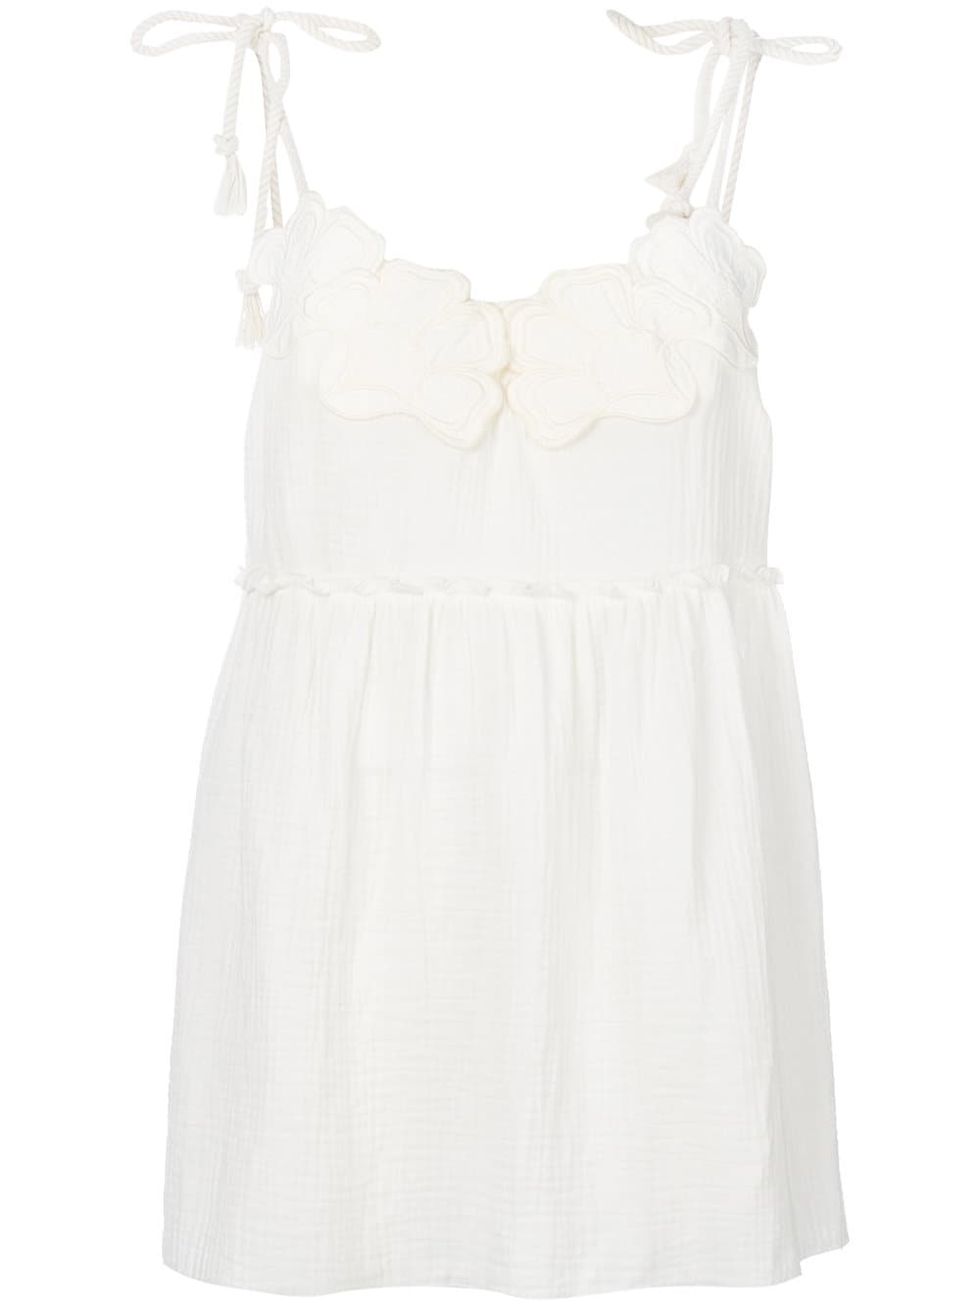 Clothing, White, Dress, Day dress, Cocktail dress, Neck, camisoles, Lace, Sleeve, Nightgown, 